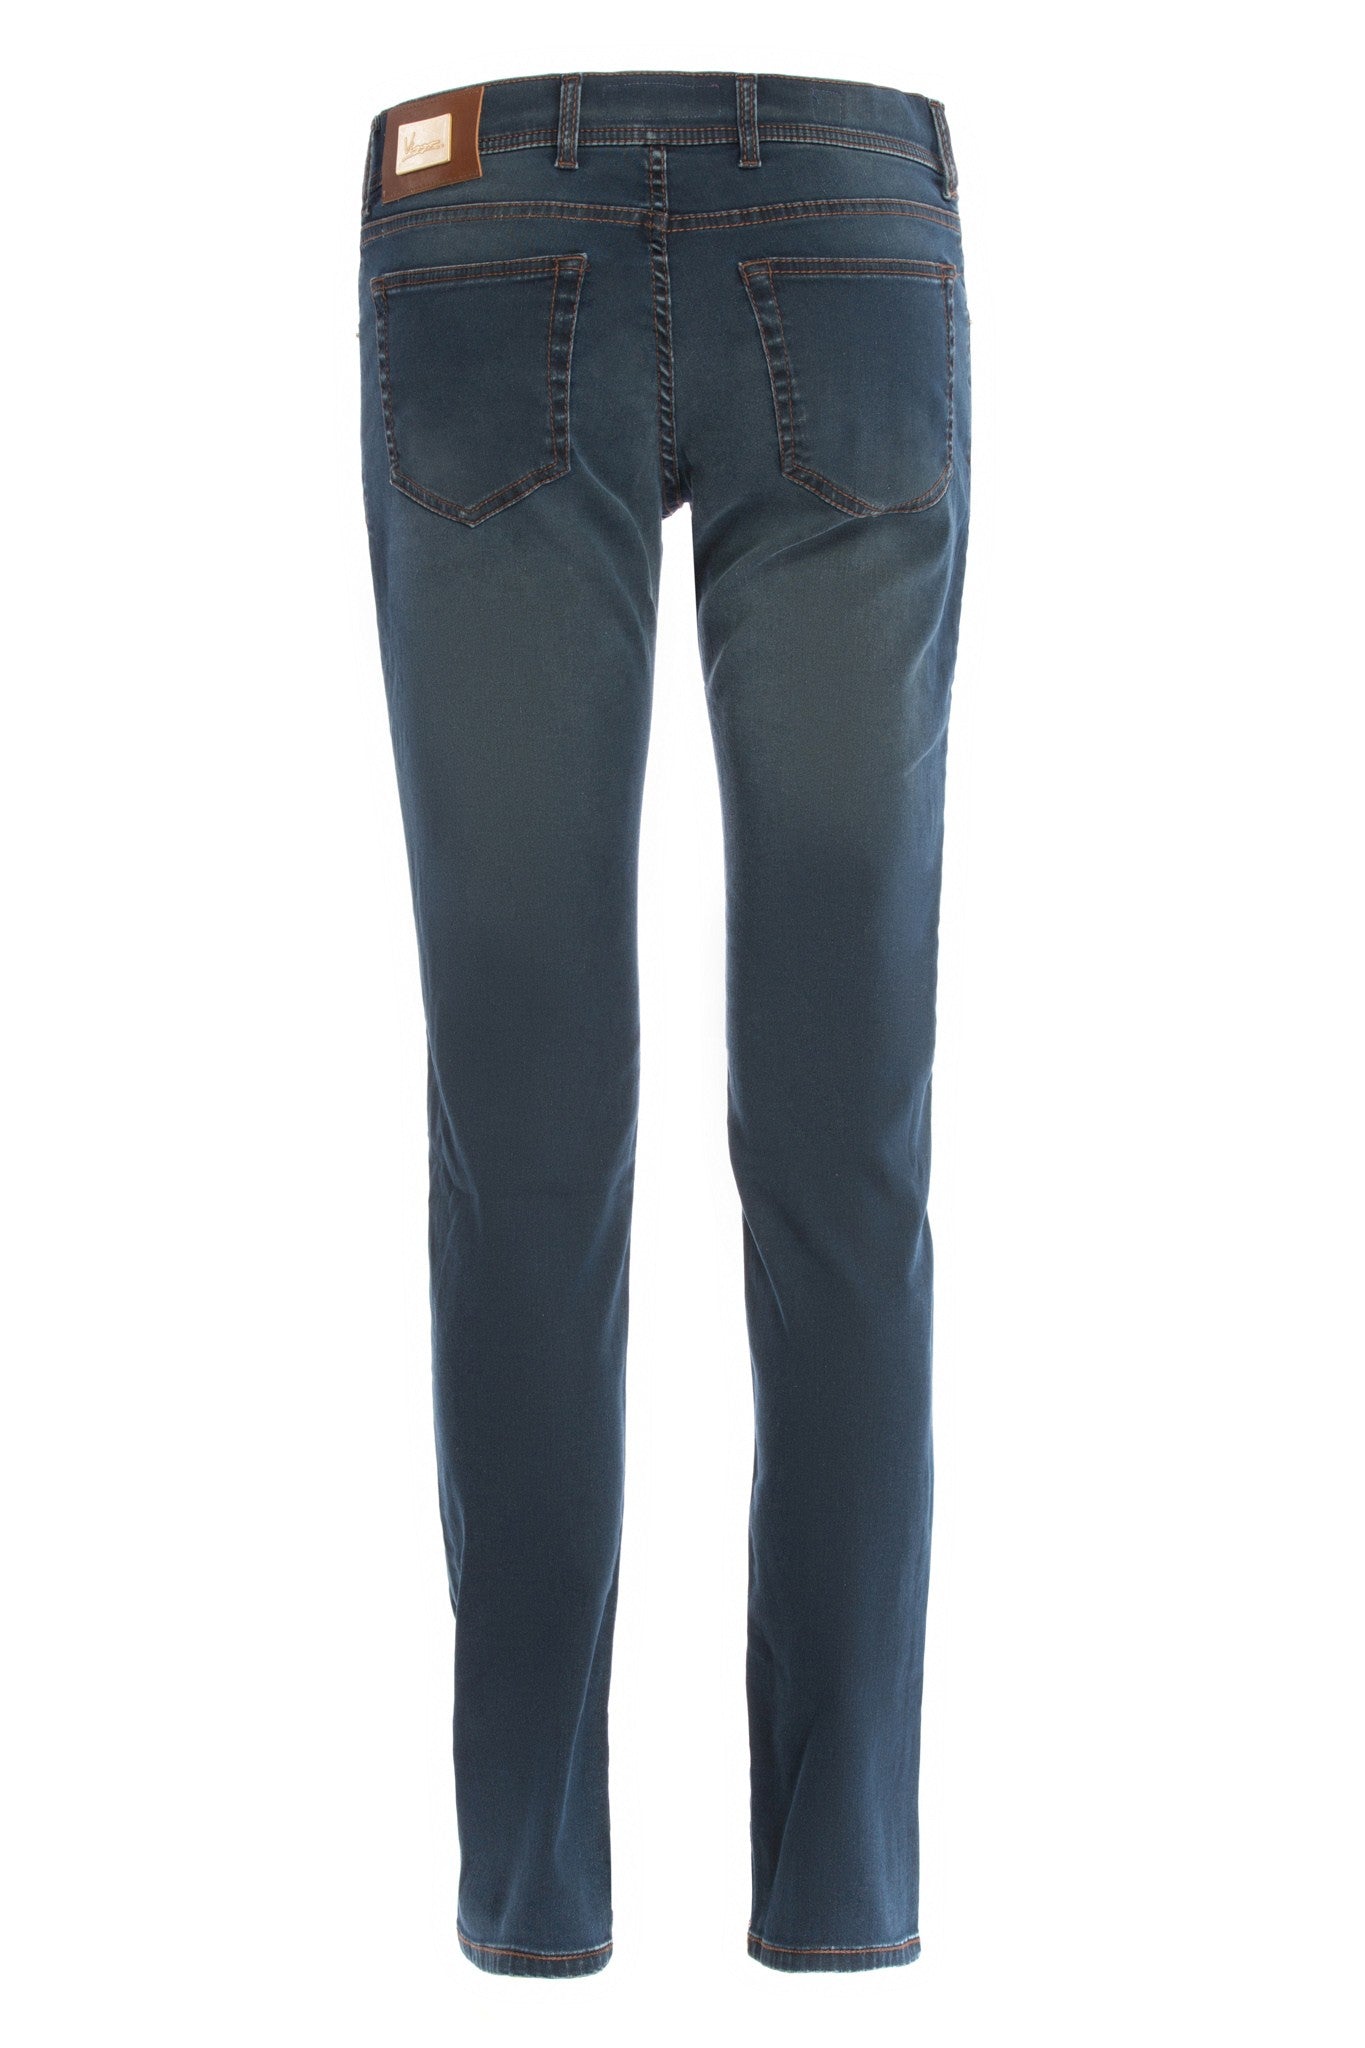 Forest Green Navy Blue Jeans